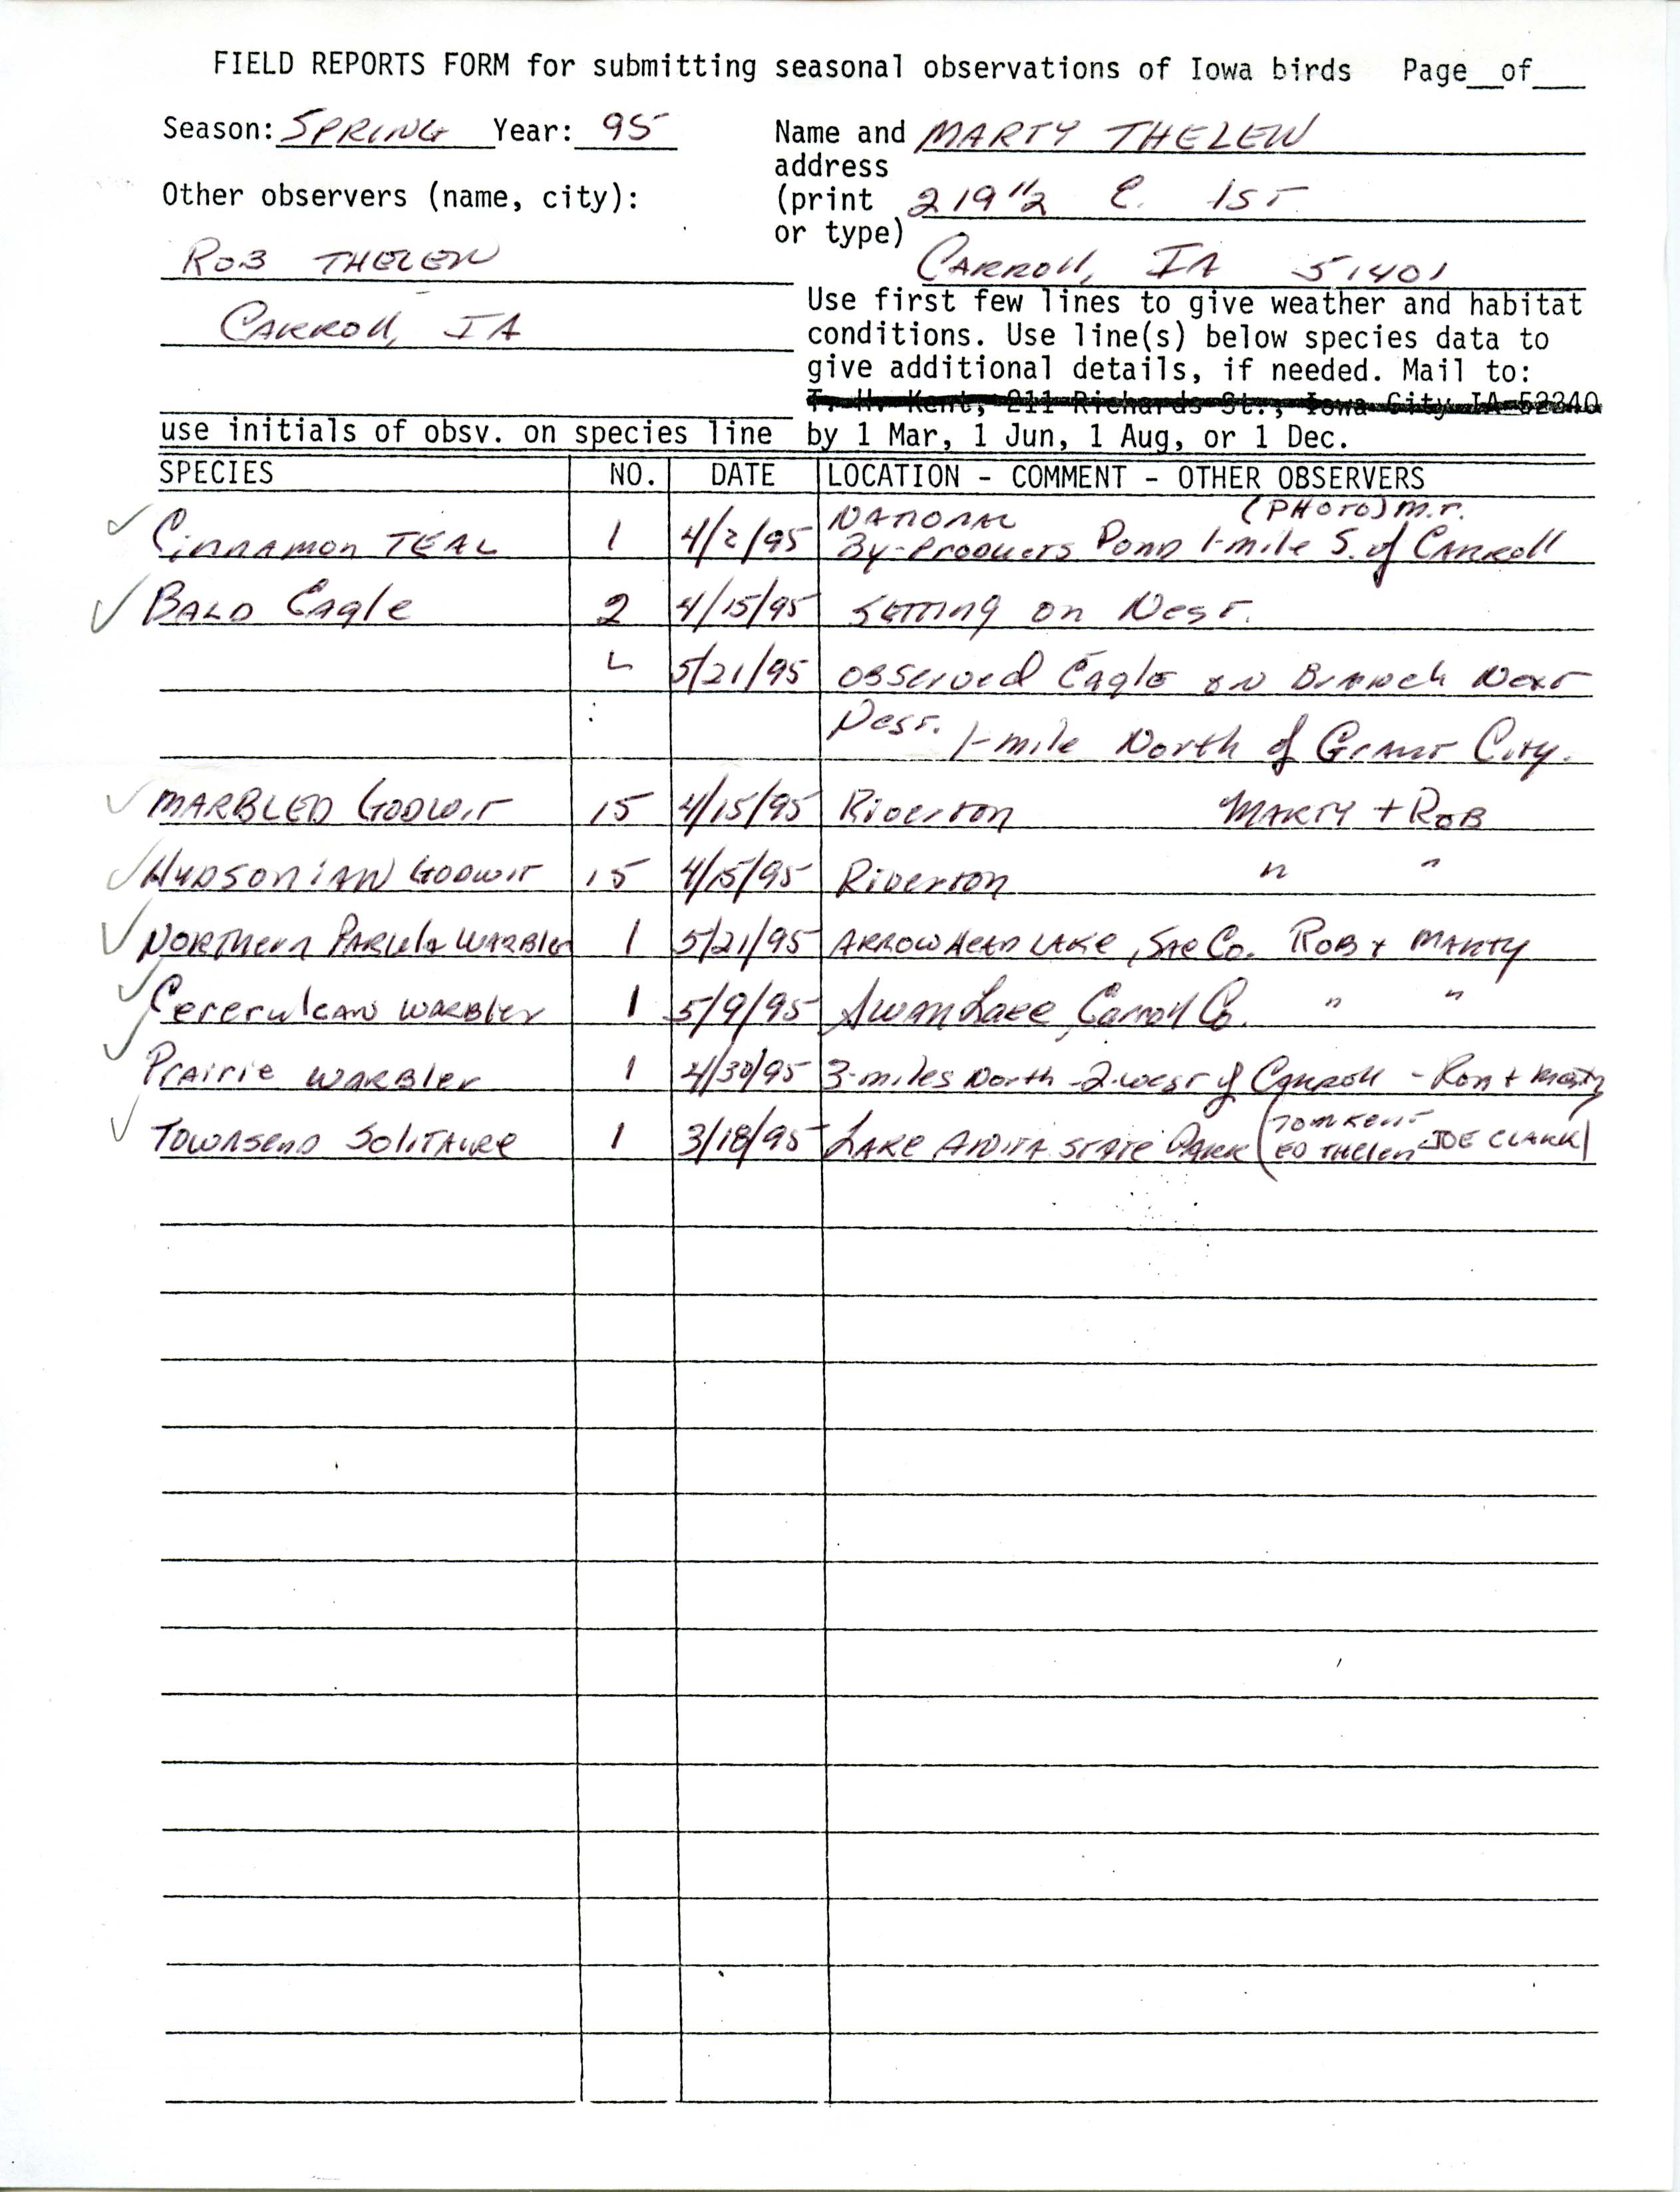 Field reports form for submitting seasonal observations of Iowa birds, spring 1995, Marty Thelen